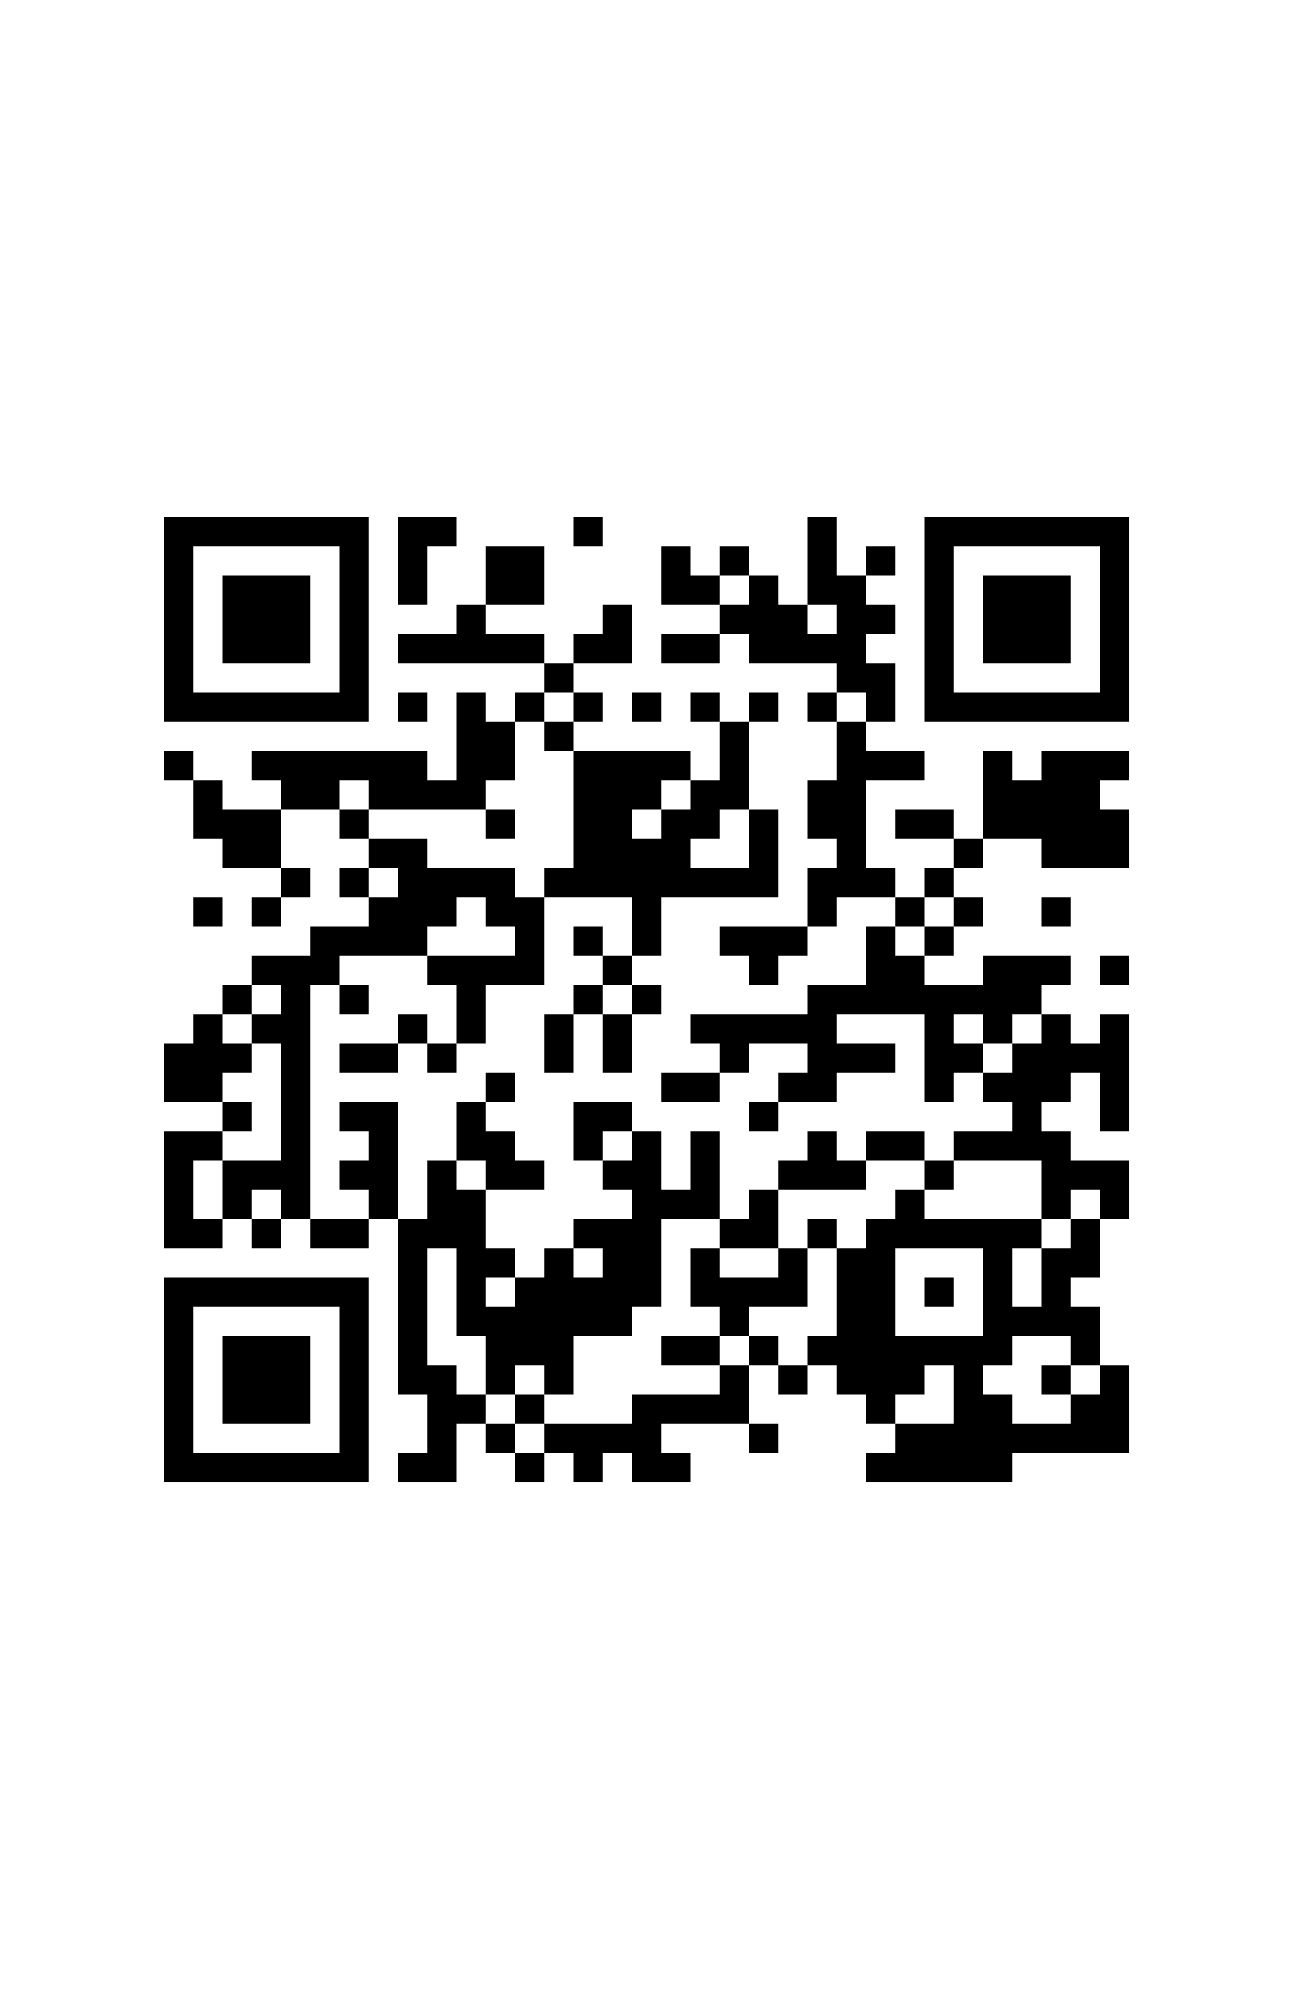 Conference QR Code